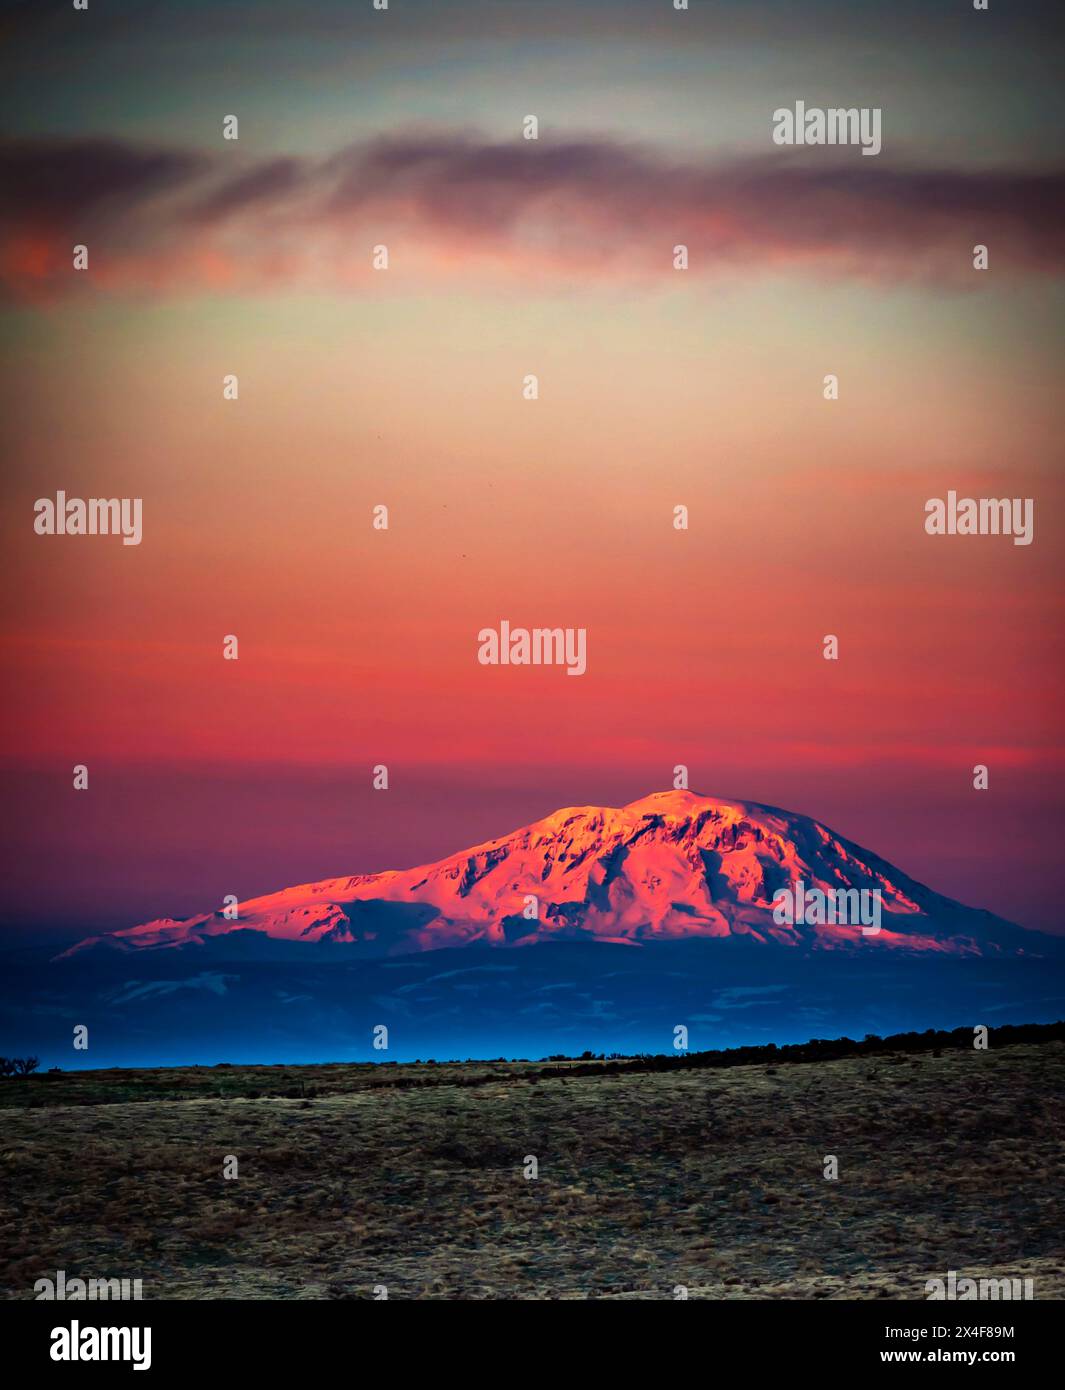 USA, Washington State, Zillah. Dawn light on Mt. Adams seen from Yakima Valley wine country in winter. Stock Photo